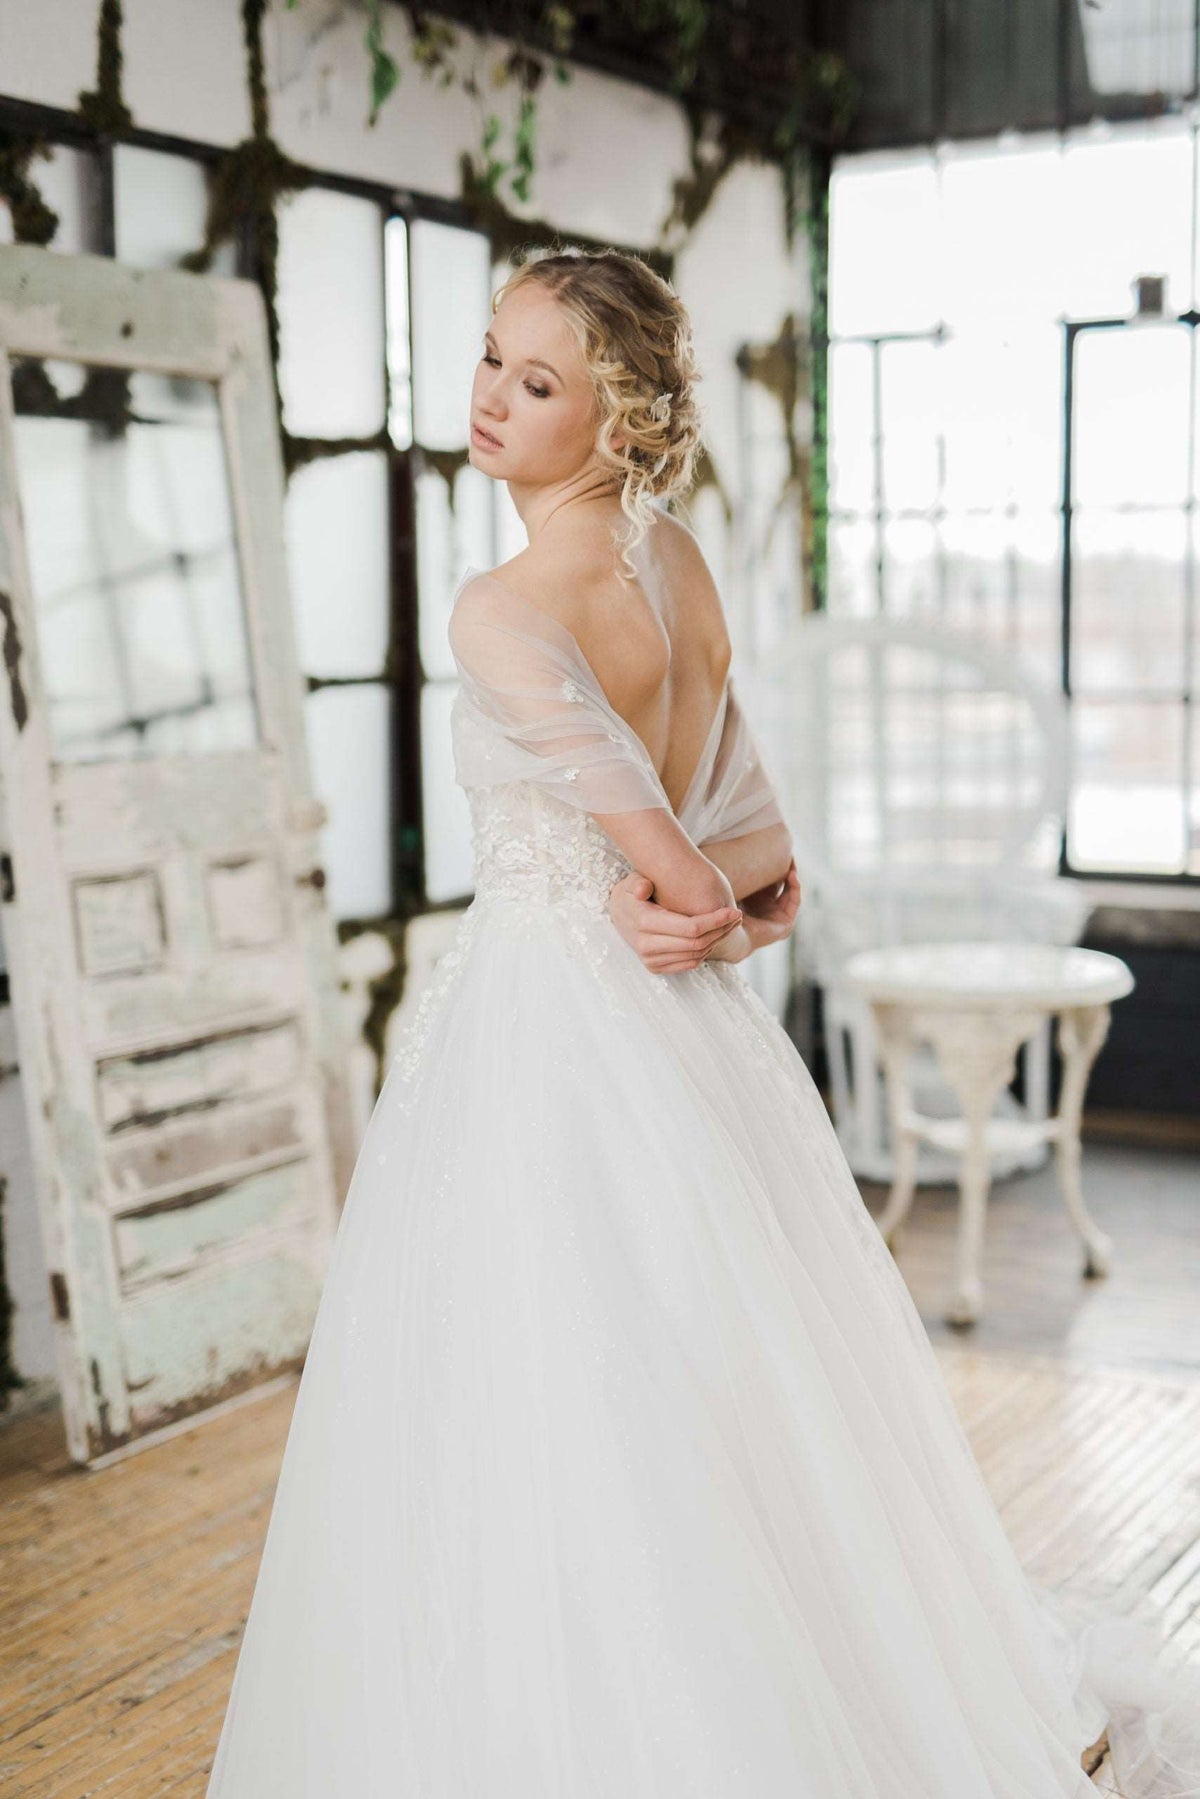 A modern princess wedding dress with yards of beaded and appliqued tulle. Designed and hand made by Catherine Langlois in Toronto, Ontario.